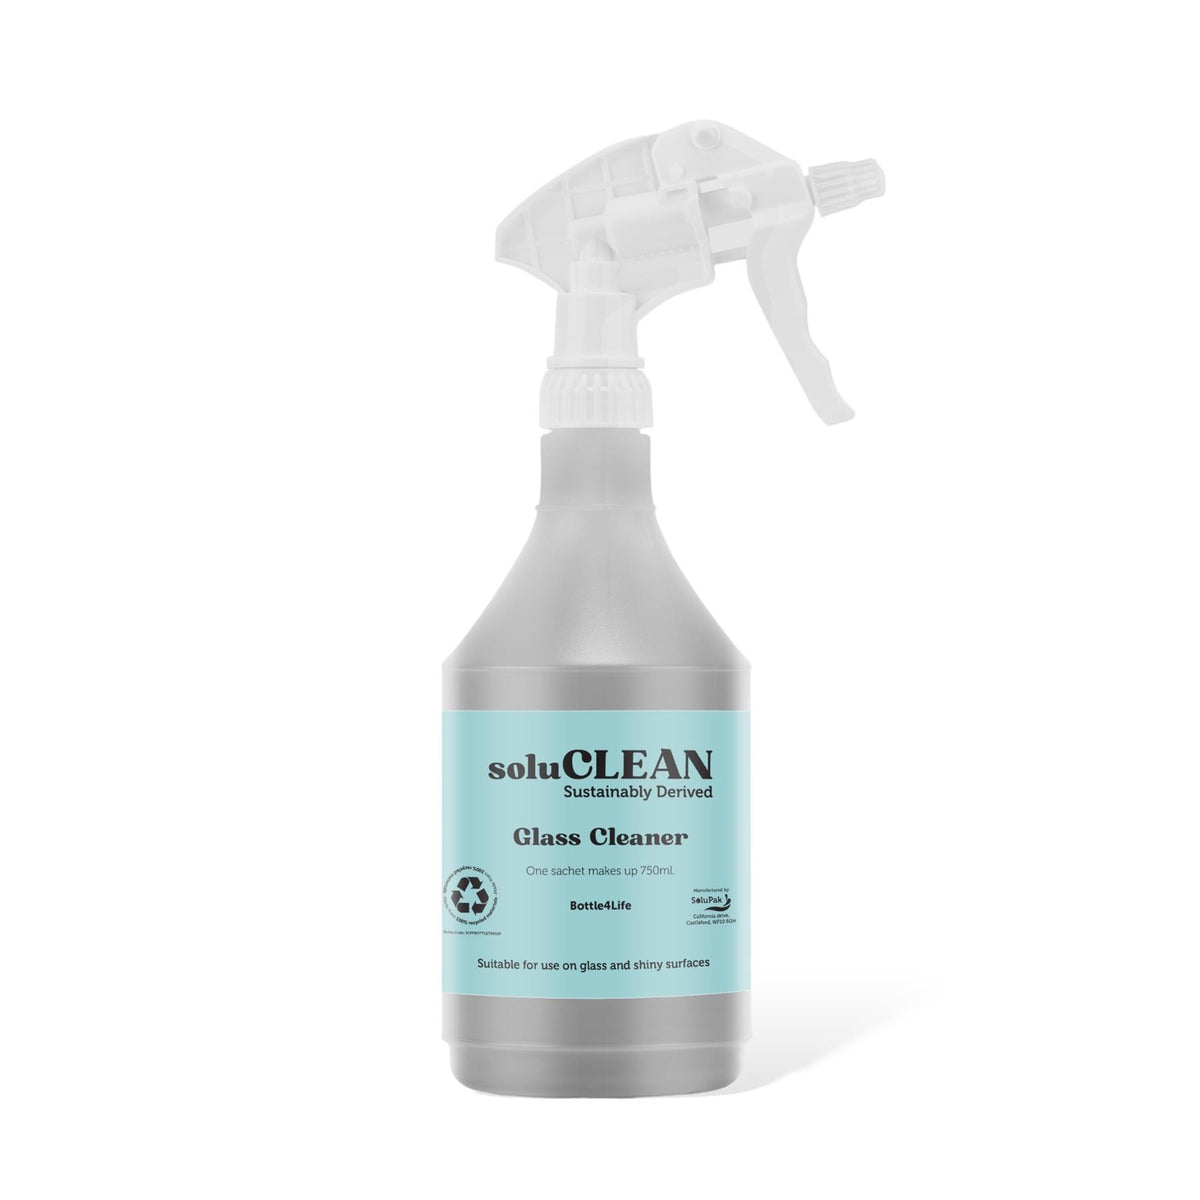 Soluclean, Glass Cleaner, Empty Trigger Spray Bottle for HouseHold Cleaning, Made from 100% Recycled Materials